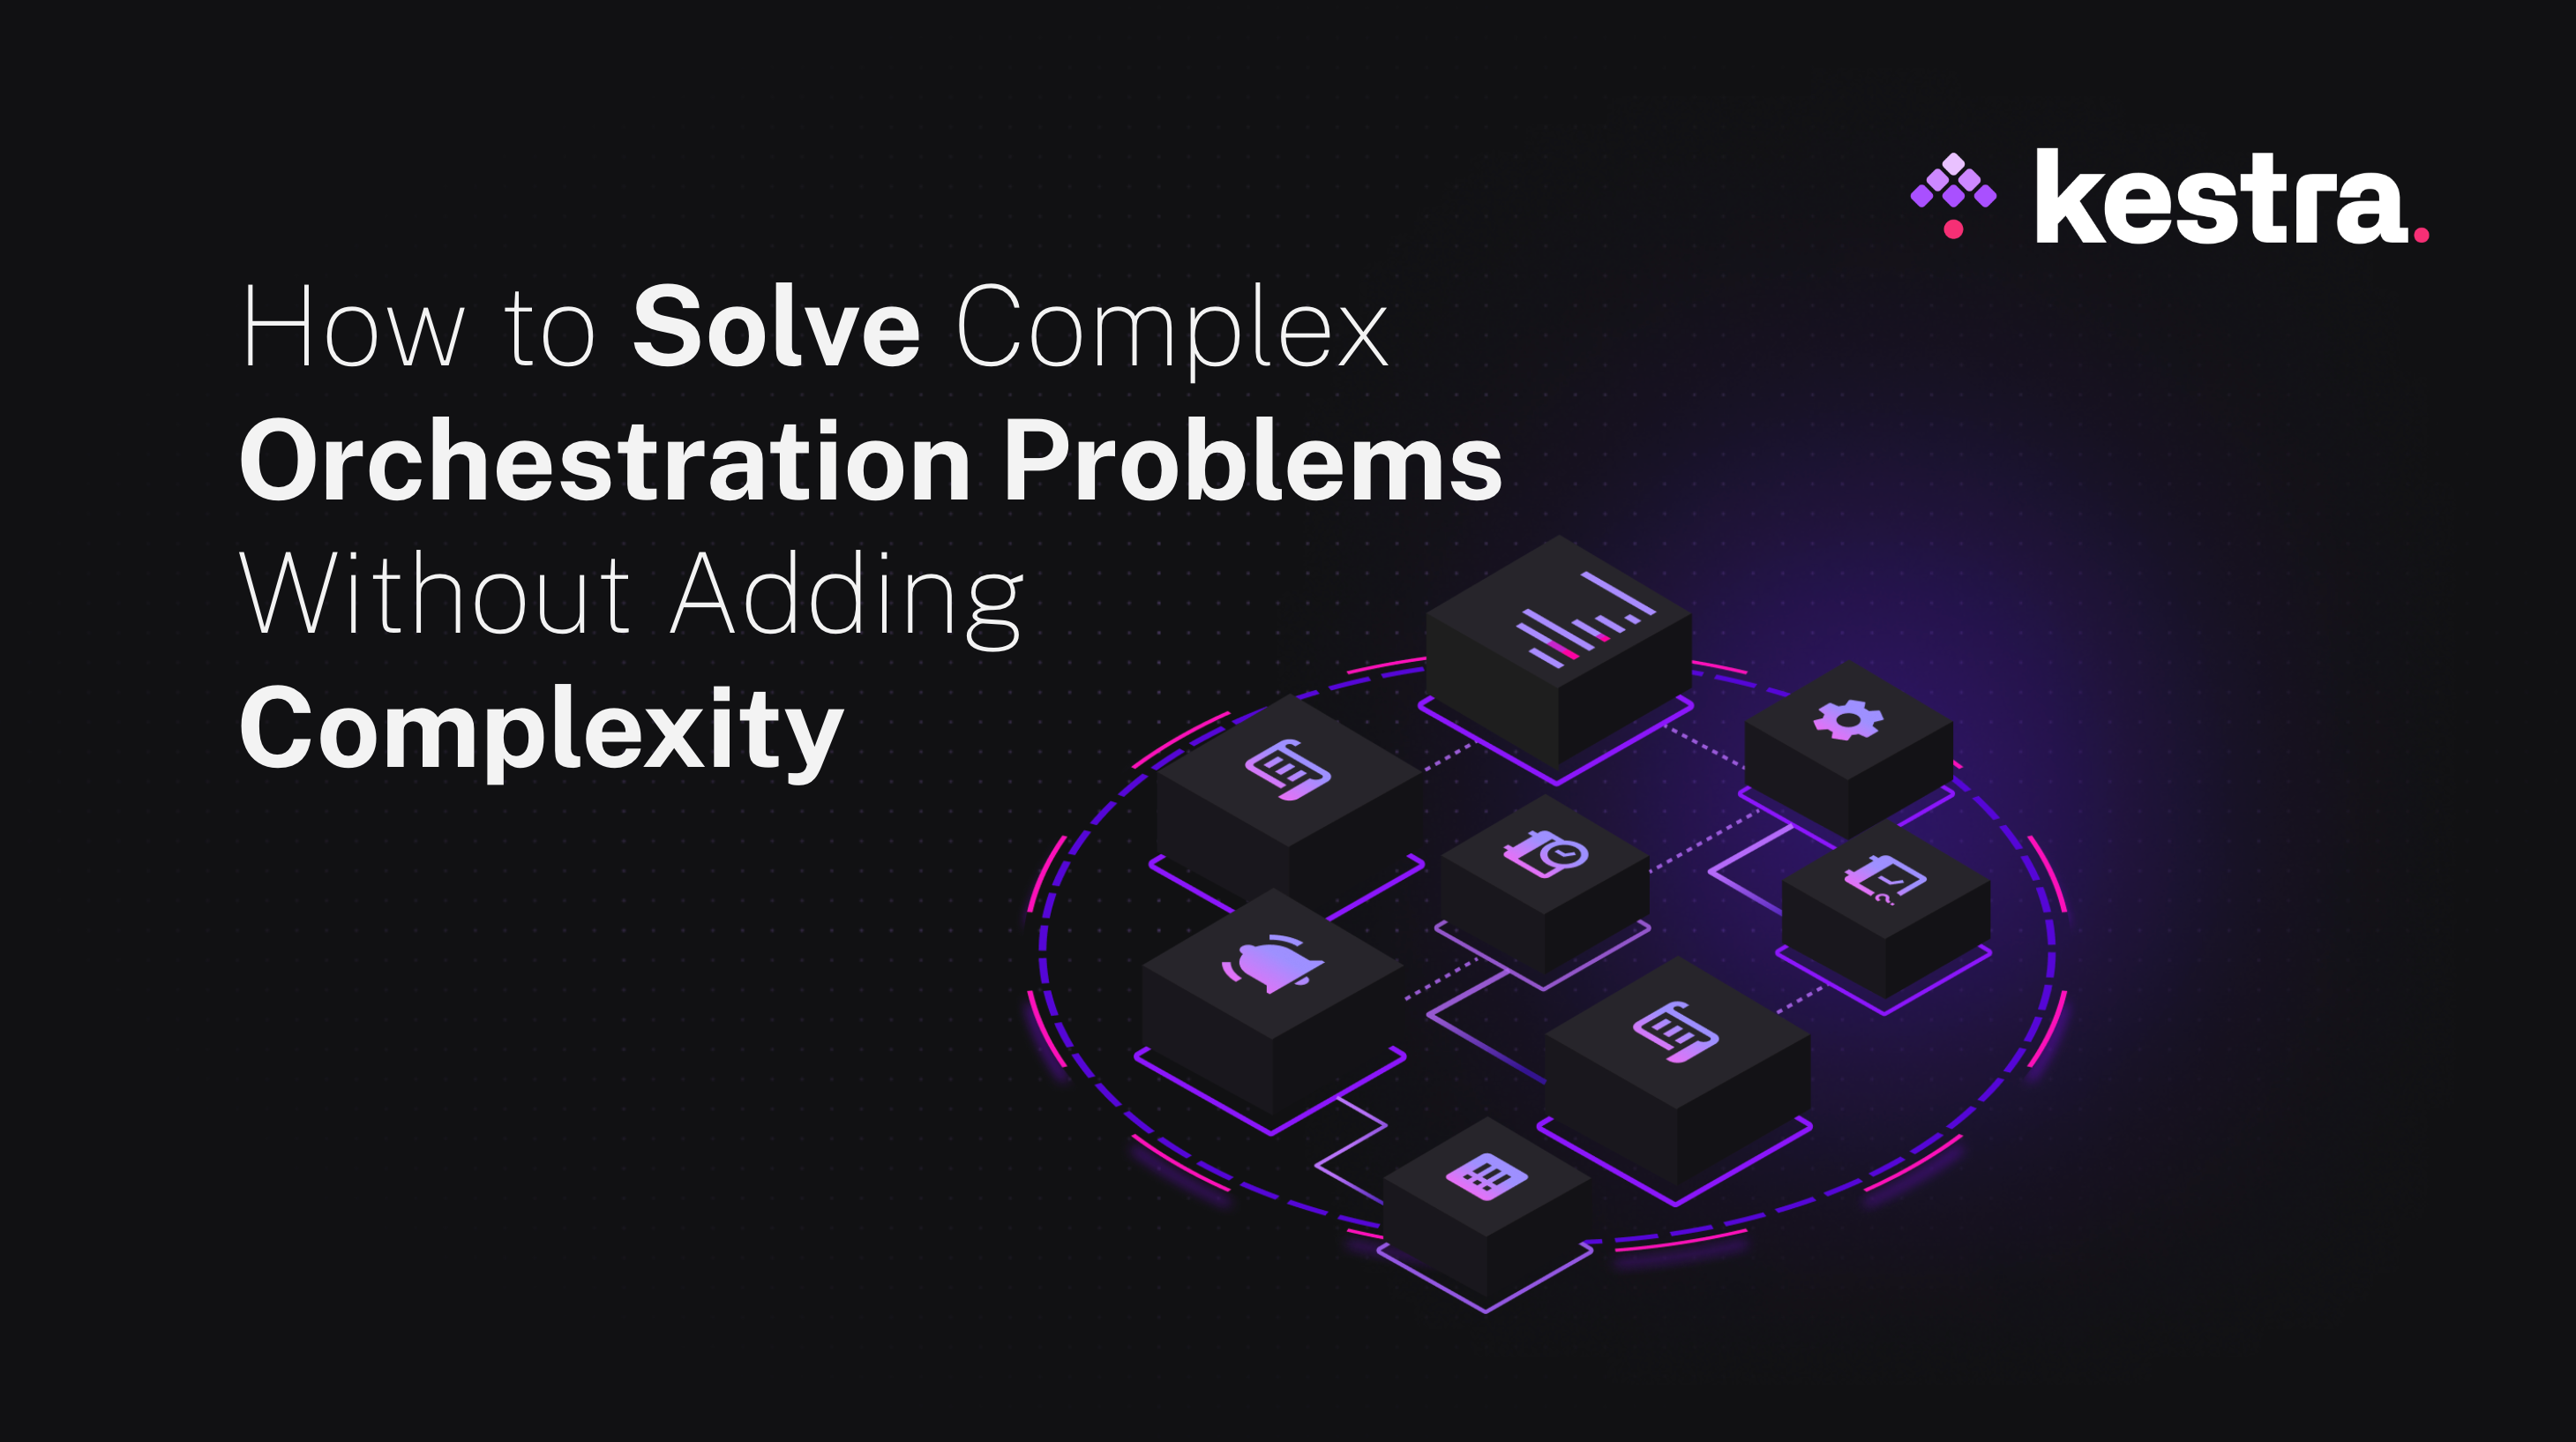 How to Solve Complex Orchestration Problems Without Adding Complexity